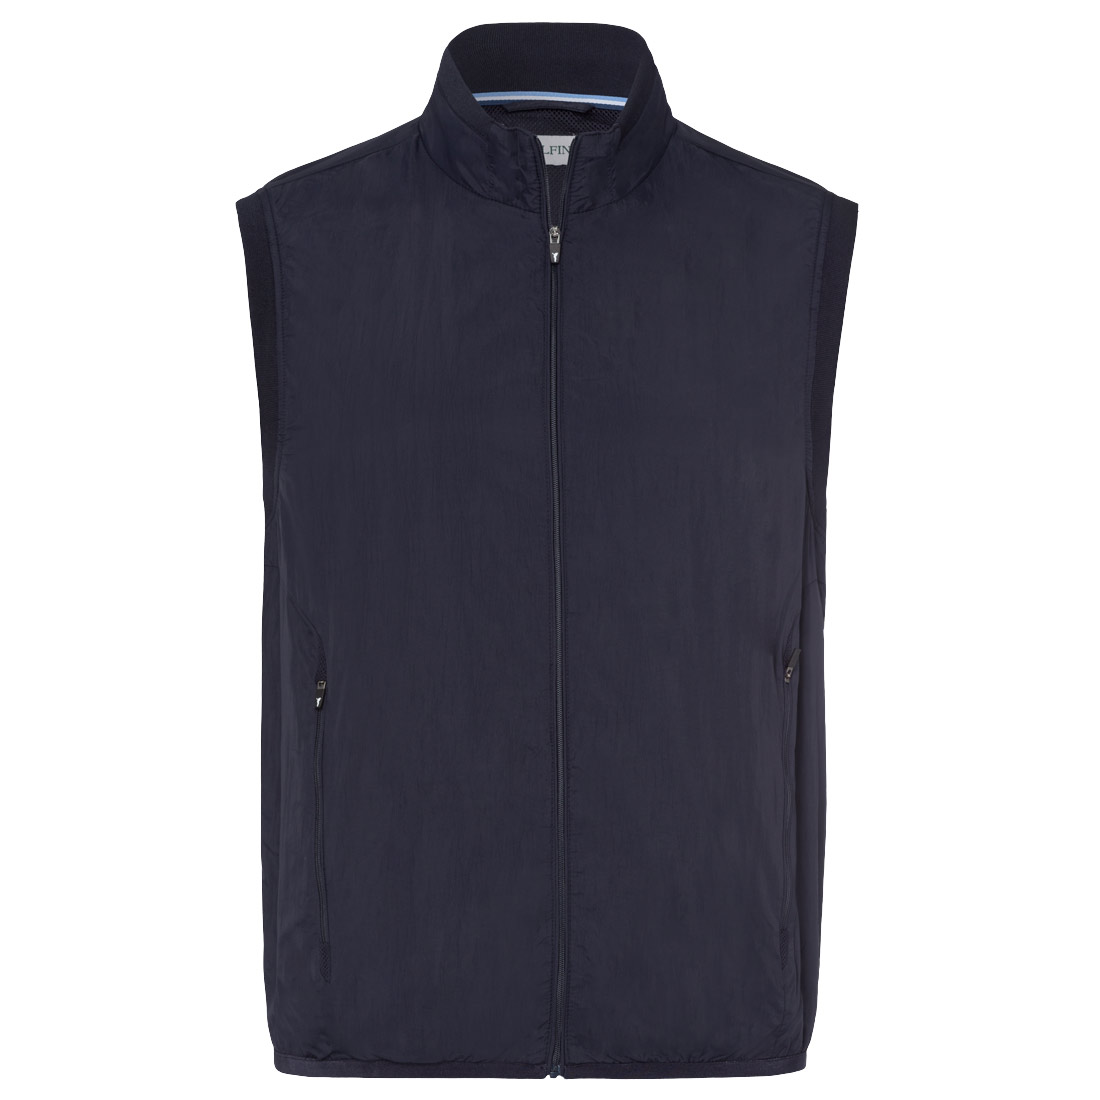 Men's golf gilet with wind protection, made from lightweight, breathable microfibre